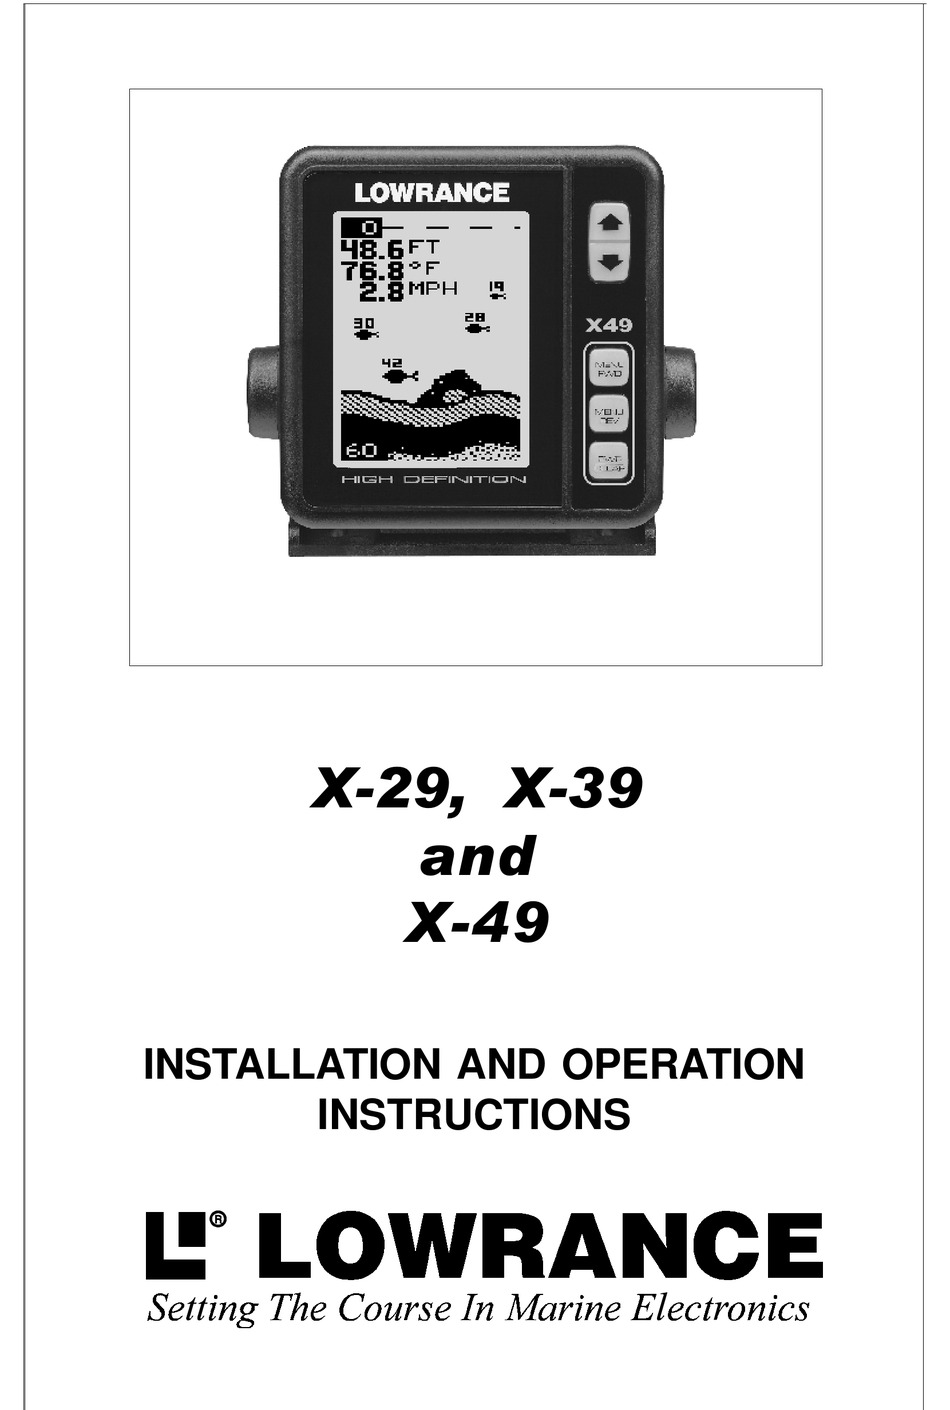 LOWRANCE X-29 SONAR INSTALLATION AND OPERATION INSTRUCTIONS MANUAL